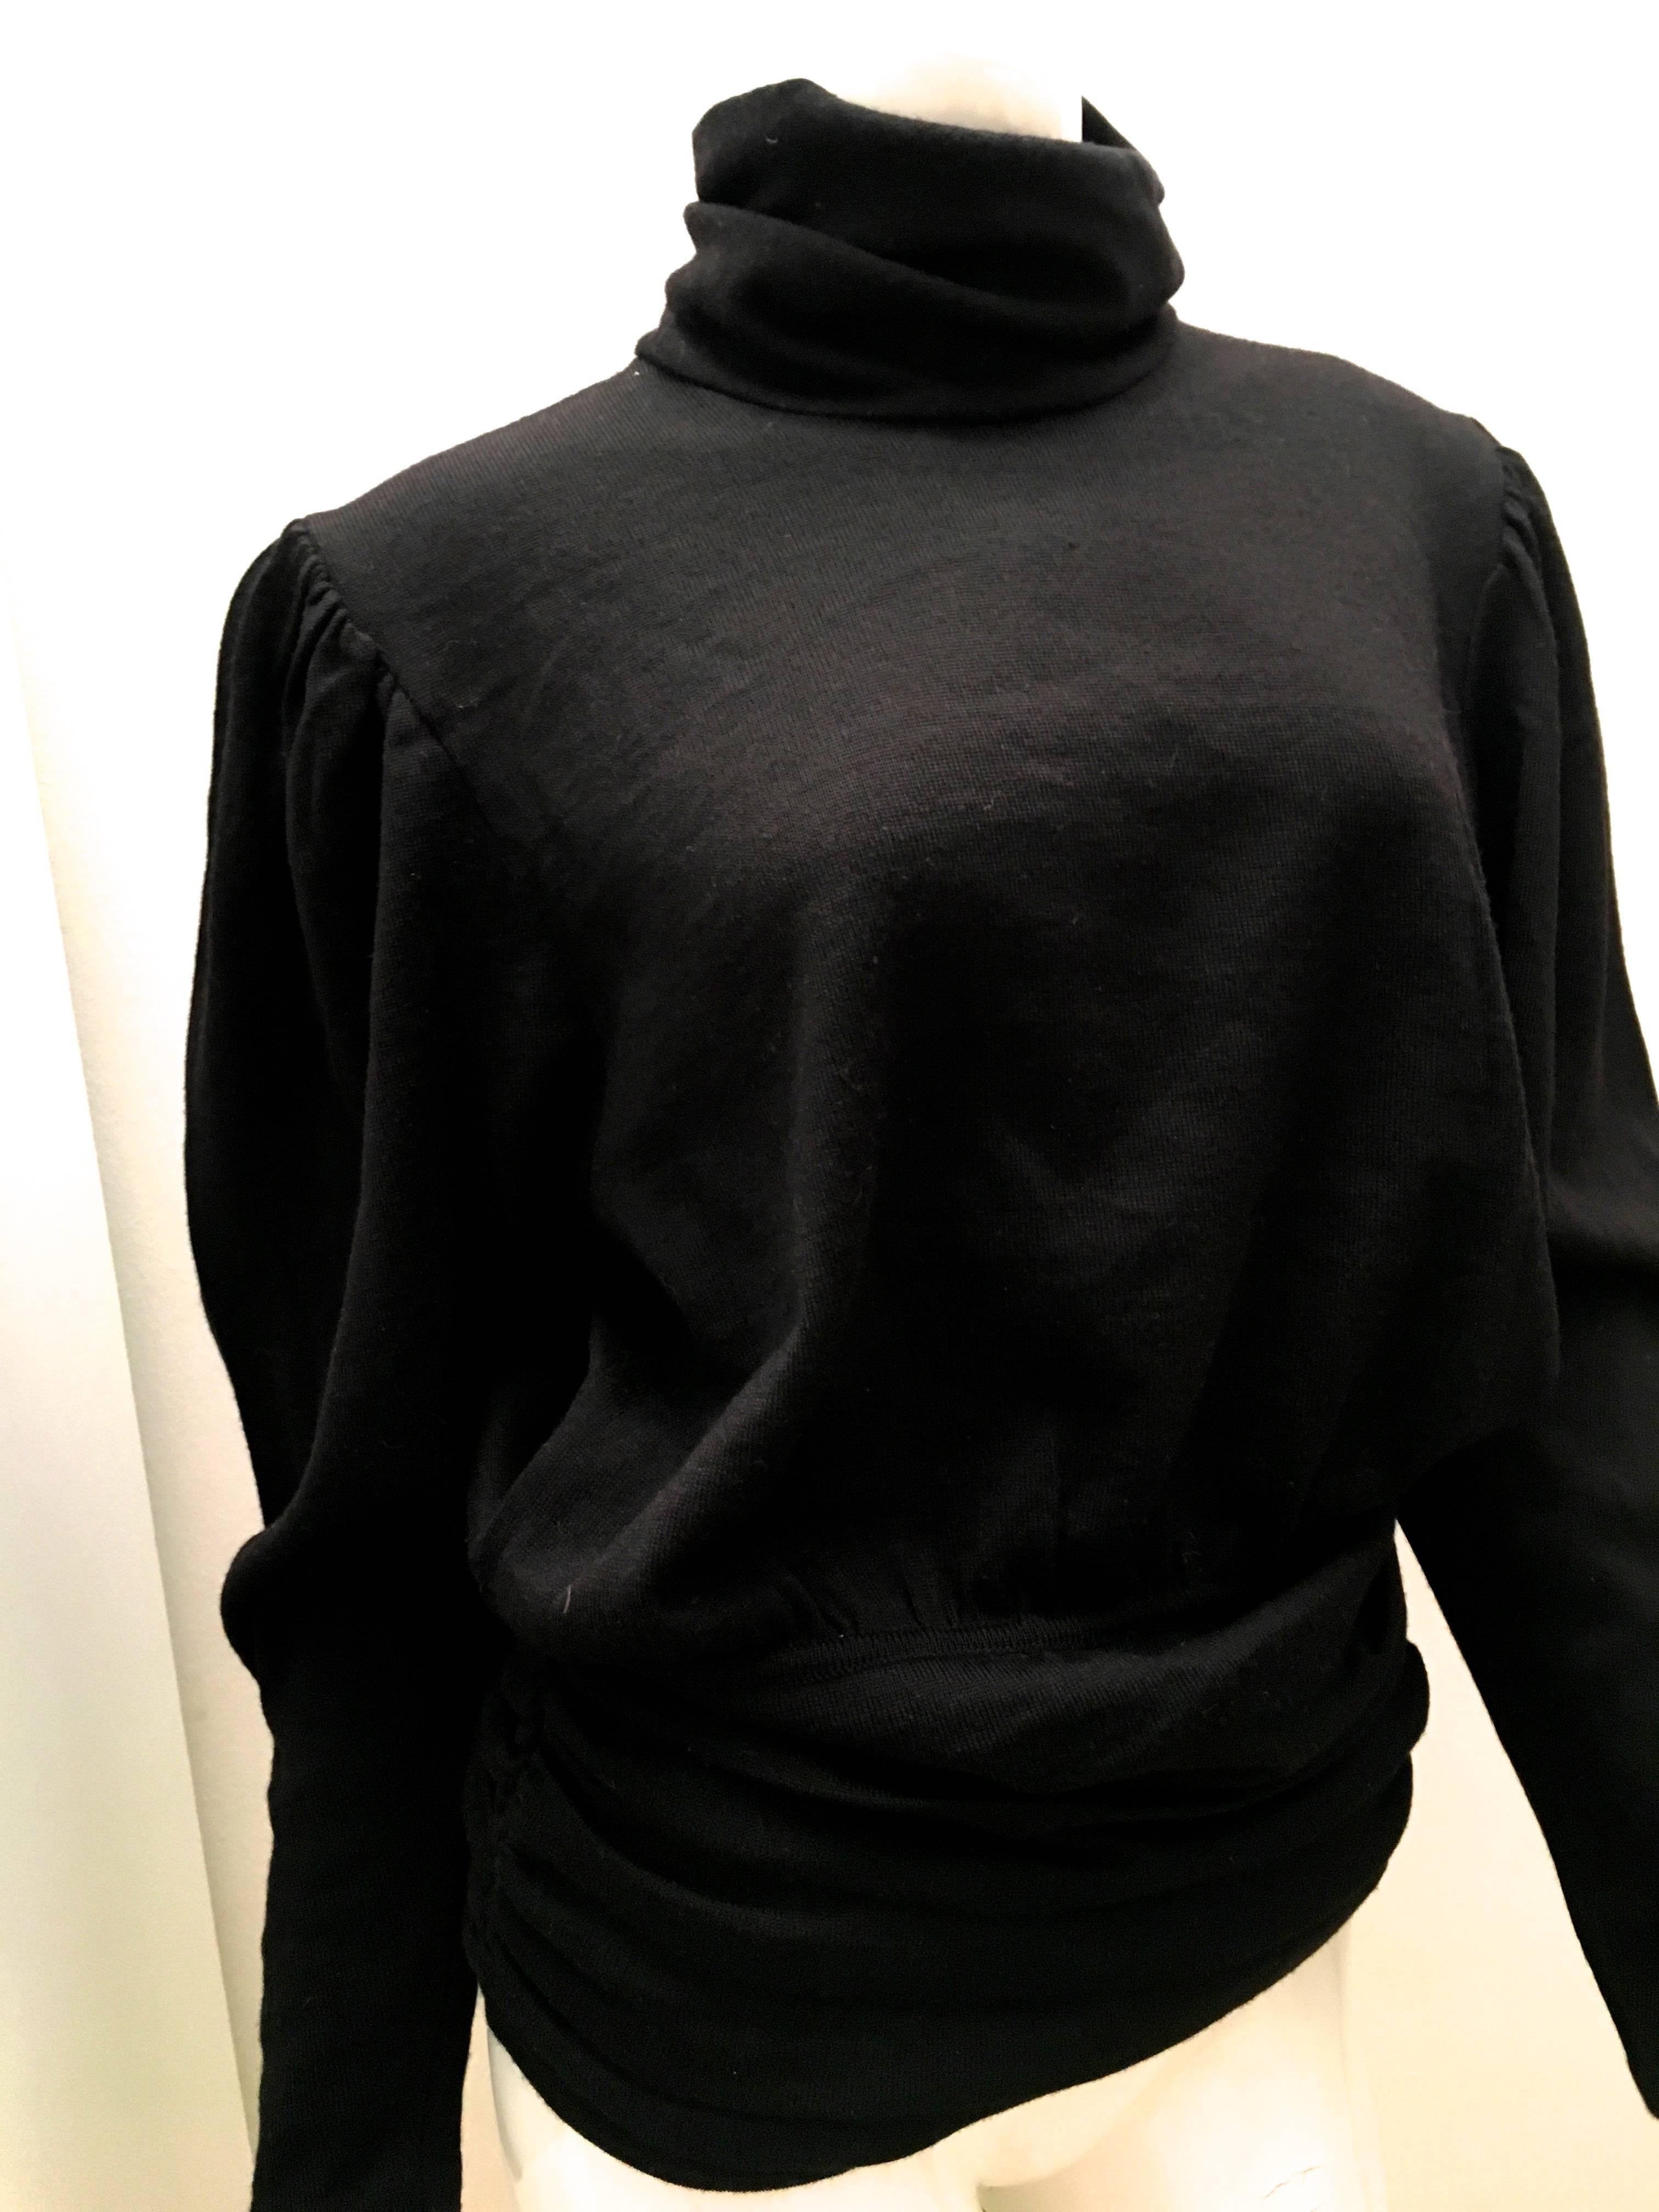 Presented here is a beautiful black sweater from Valentino. The sweater has a turtle neck and is comprised of gathered fabric on sweater to create body to the scarf. Made in Italy. 100% Wool. Please see below for details of measurements. The sweater